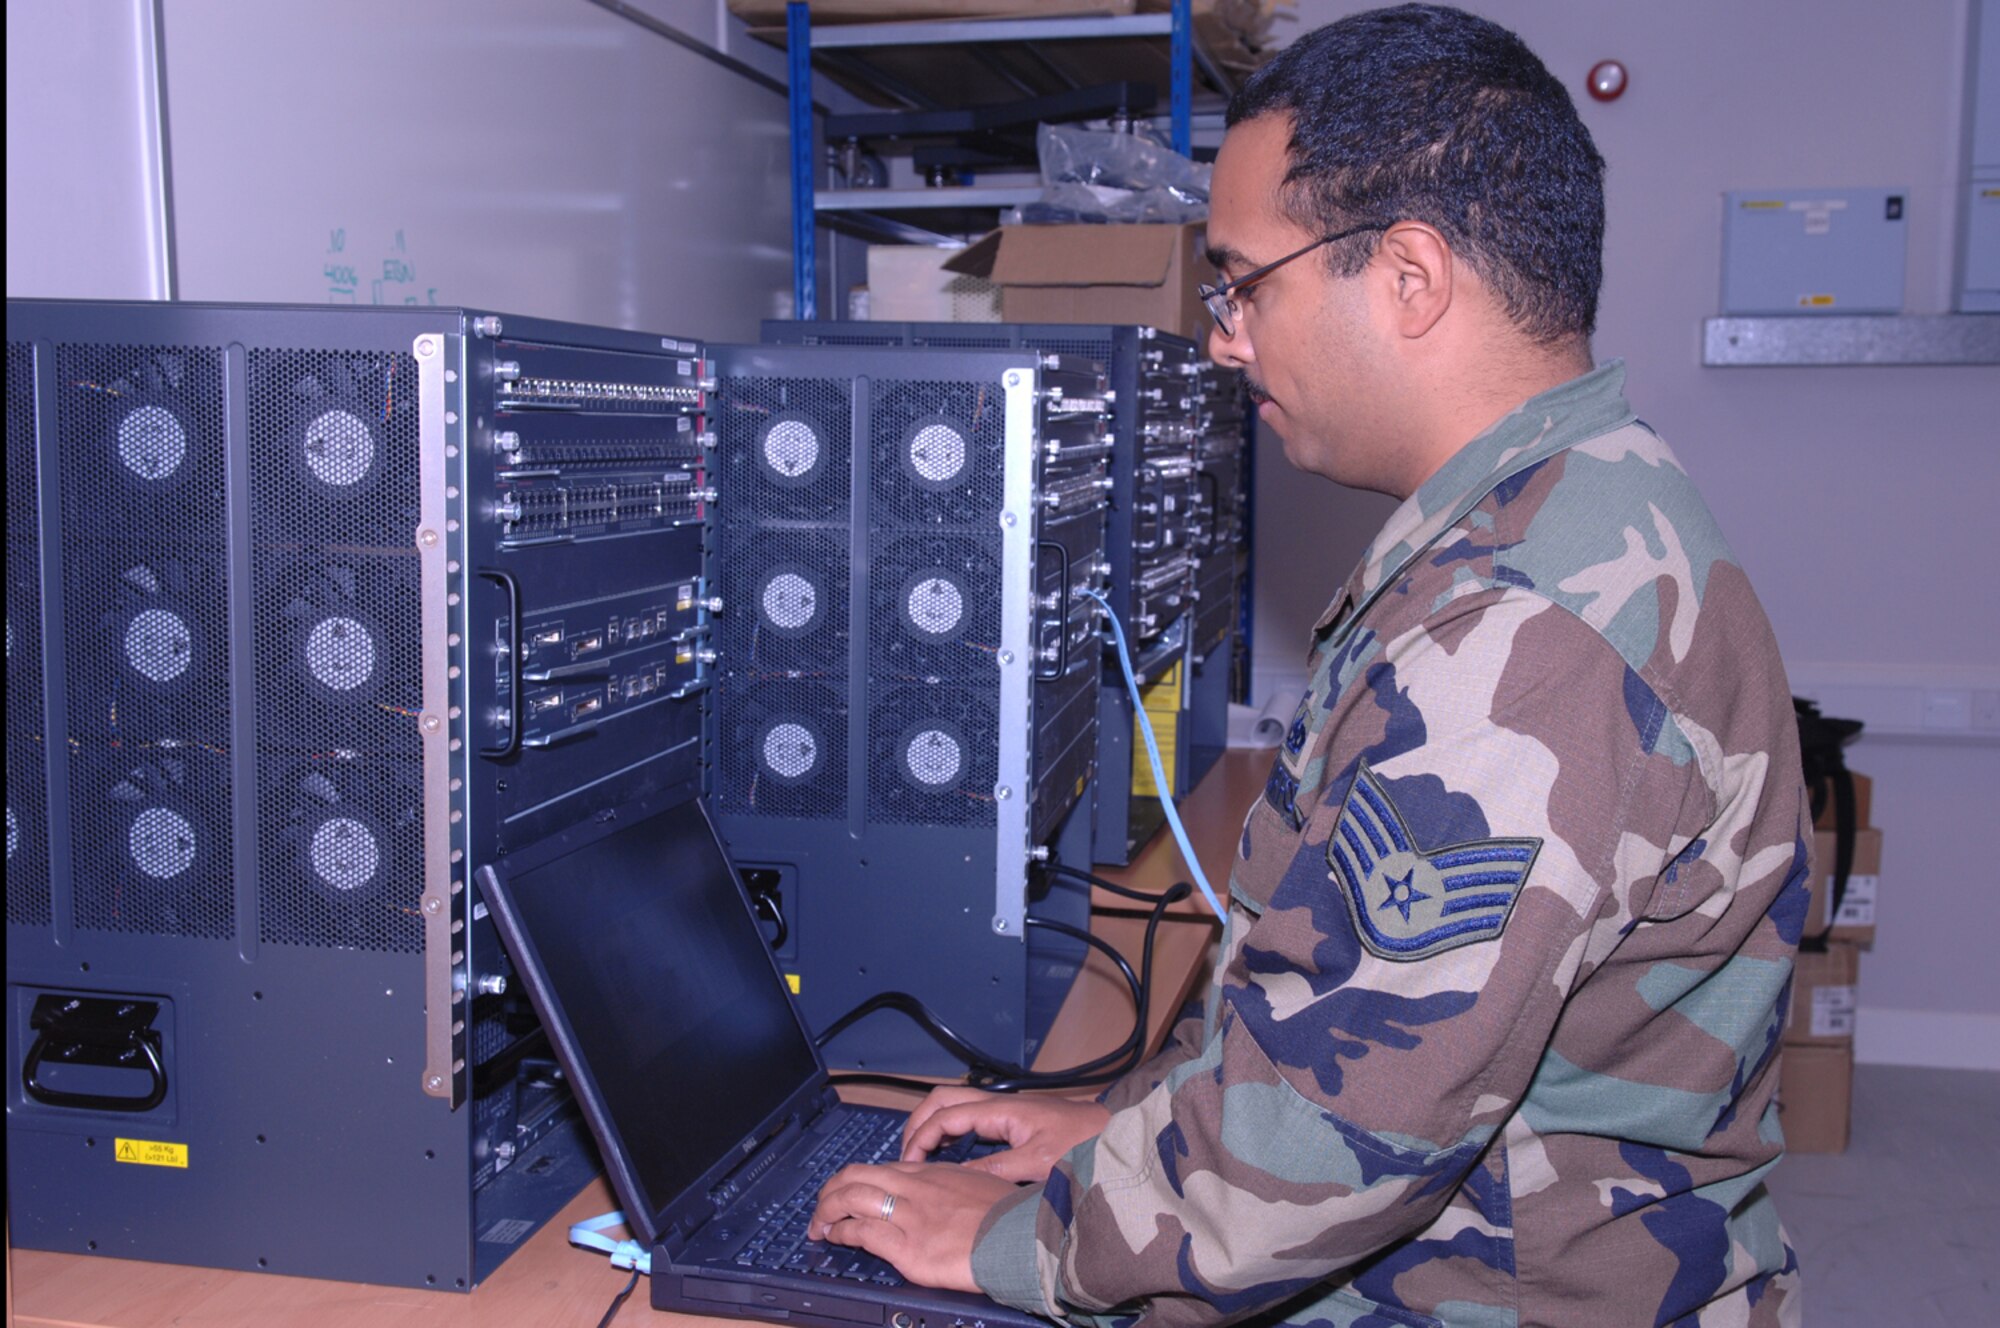 Staff Sgt. Julio Gonzalez, 48th Communications Squadron network infrastructure technician, prepares to connect a console cable to configure the network switch Oct 23 at RAF Lakenheath, England.   Staff Sgt Gonzalez performs routine maintenance training on the switch to ensure the base maintains connectivity. (U.S. Air Force photo by Tech. Sgt. Sabrina Johnson)